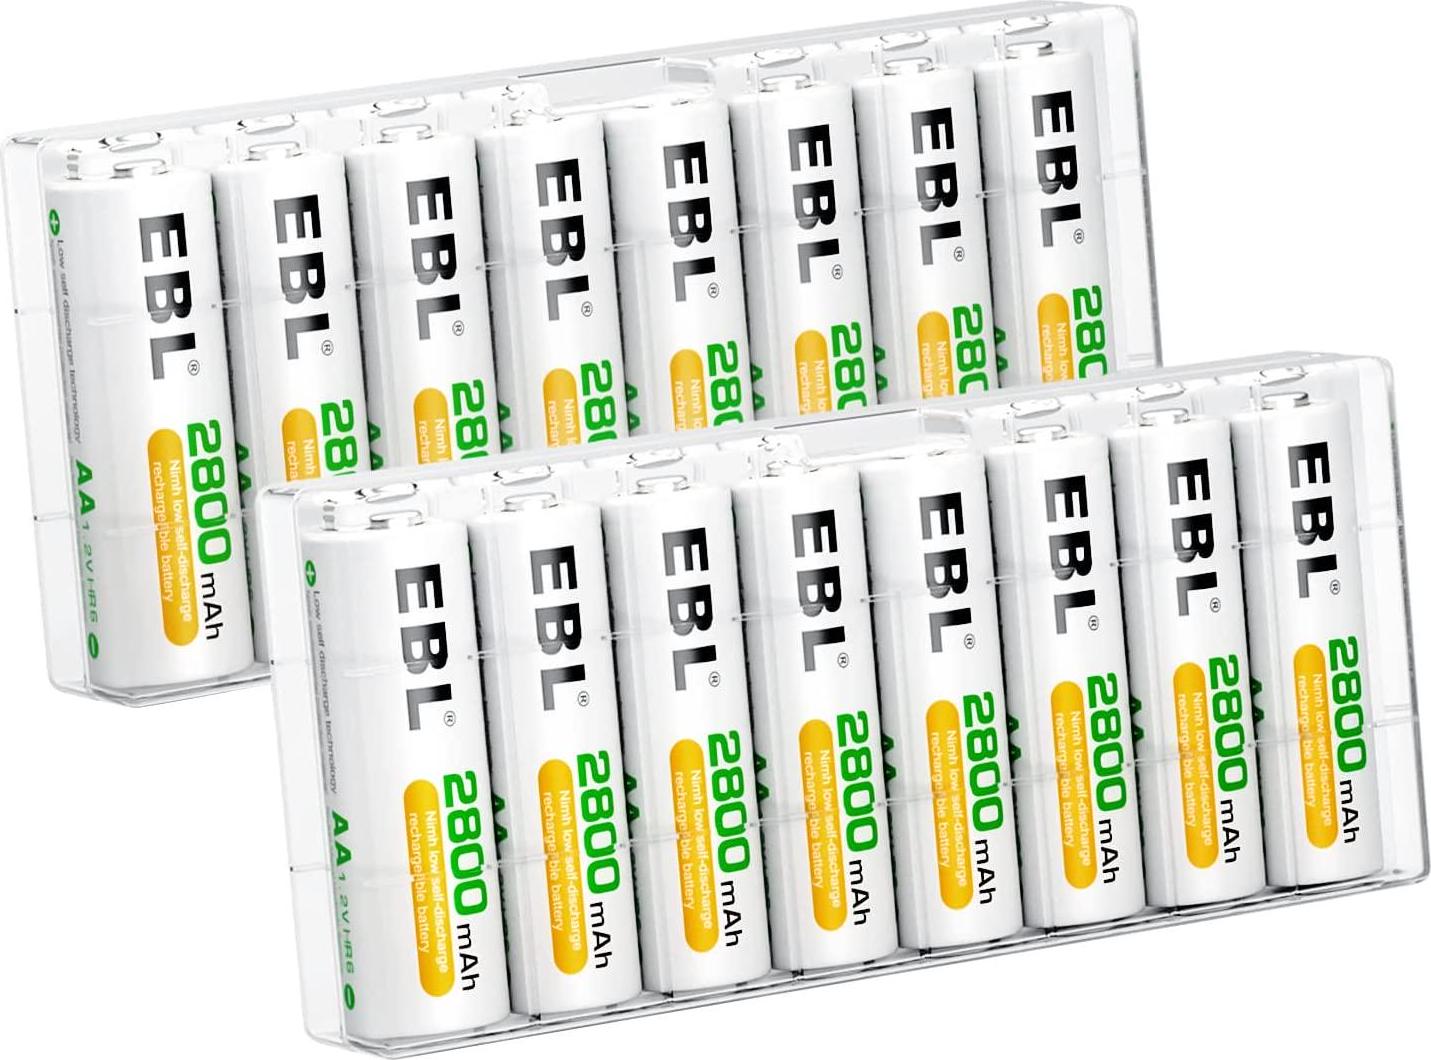 EBL, EBL 16 Pack AA 2800mAh Rechargeable Batteries with Battery Storage Case - UL Certified